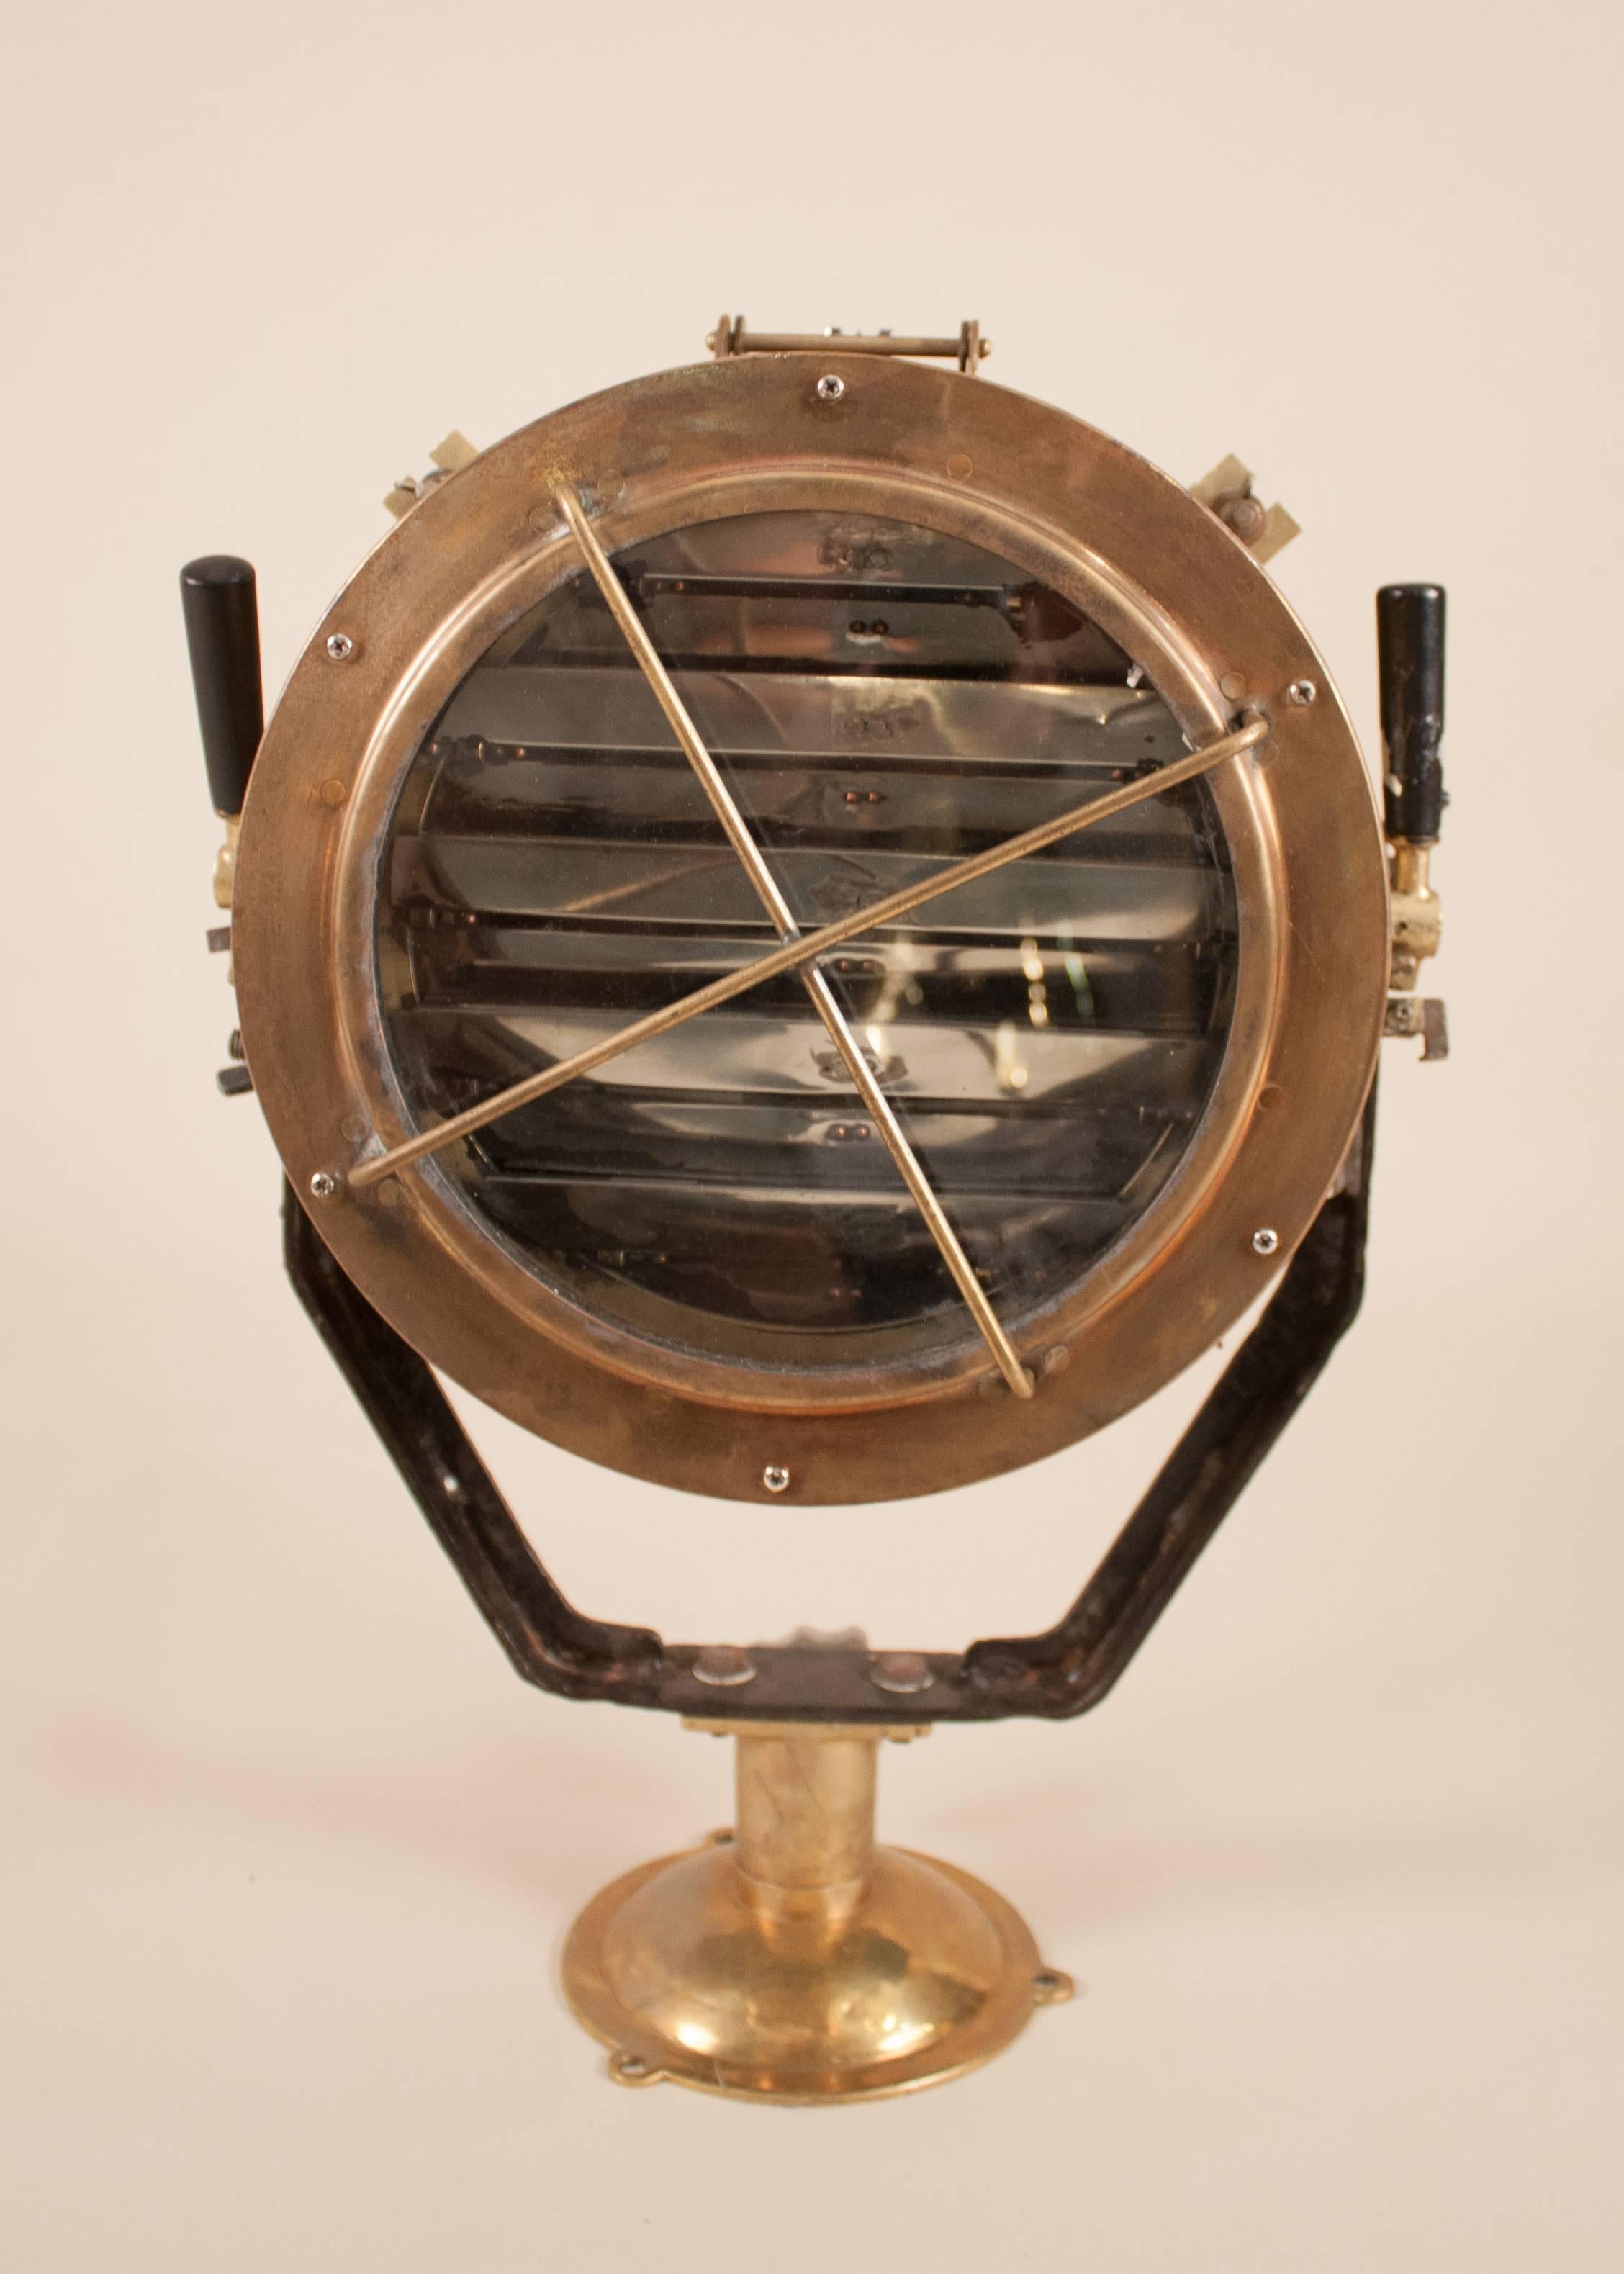 A solid brass daylight signaling lamp salvaged from a Japanese naval vessel and attentively restored. This mounted maritime spotlight features working aluminum signal shutters and sights, as well as multiple wooden levers/adjustments for